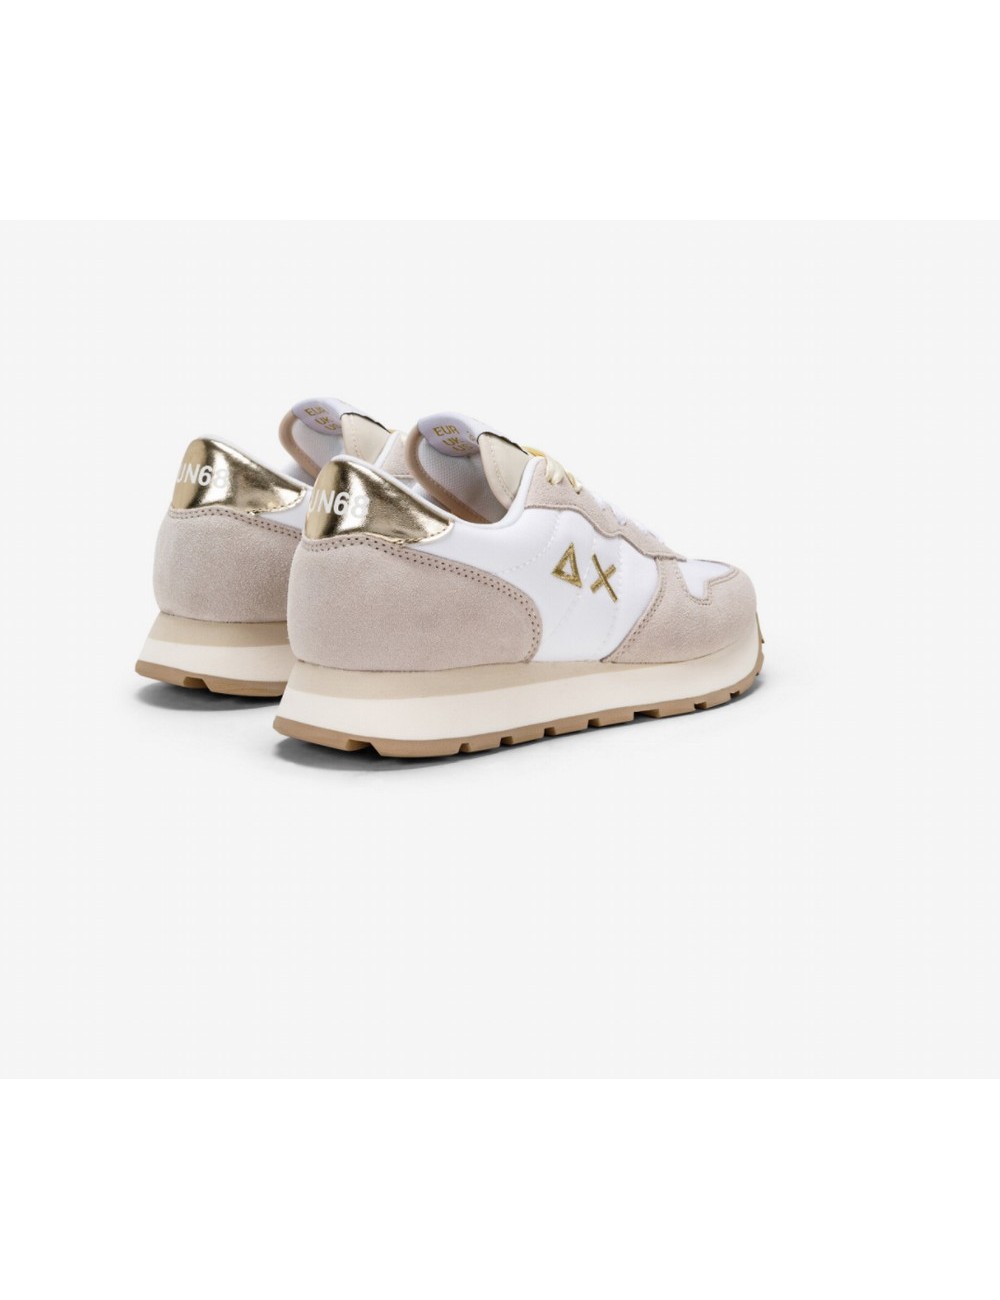 SNEAKERS MUJER SUN 68 ALLY GOLD BLANCO